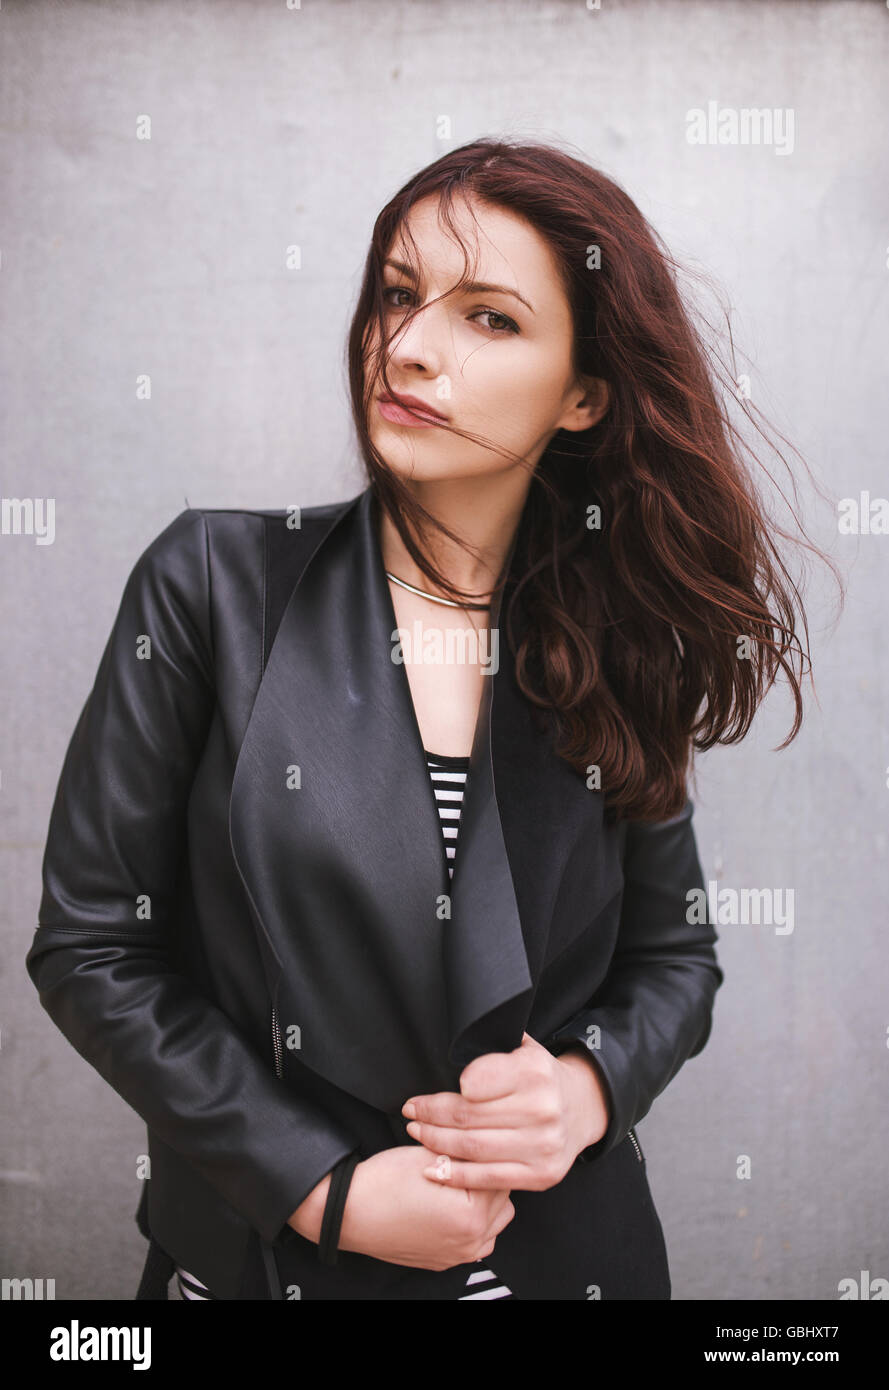 Portrait of a young woman in black leather jacket Stock Photo